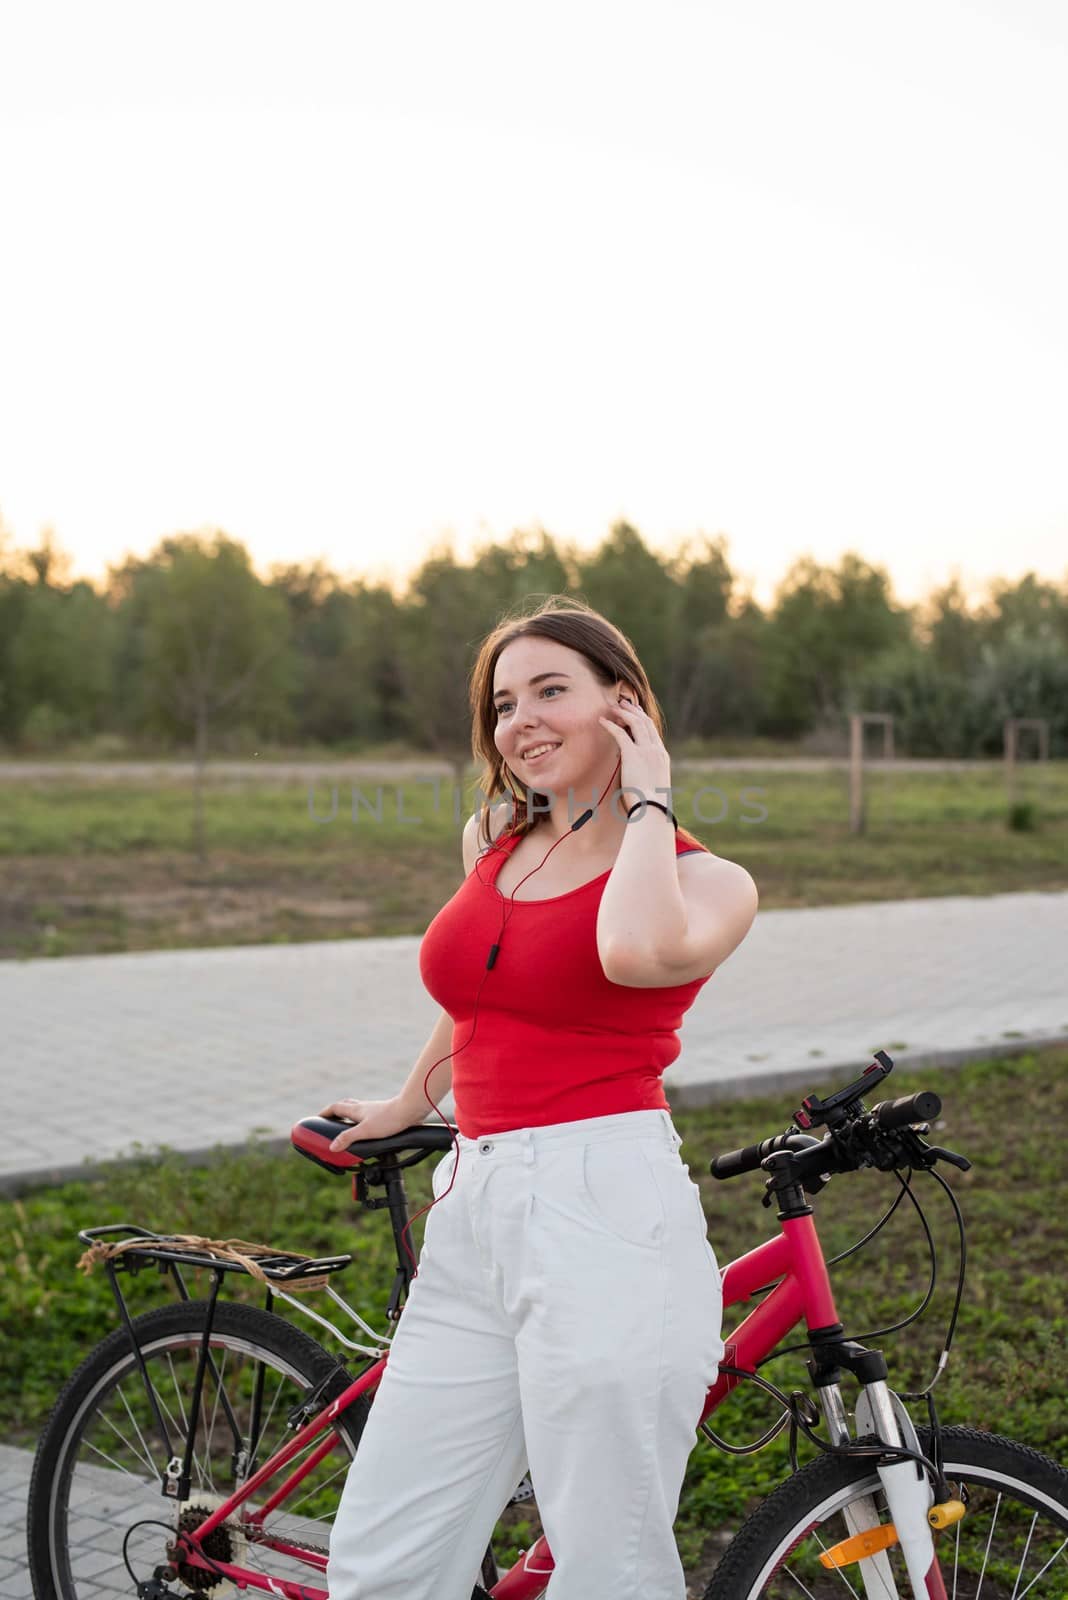 Teenage girl with her bike listening to the music in the park at sunset by Desperada